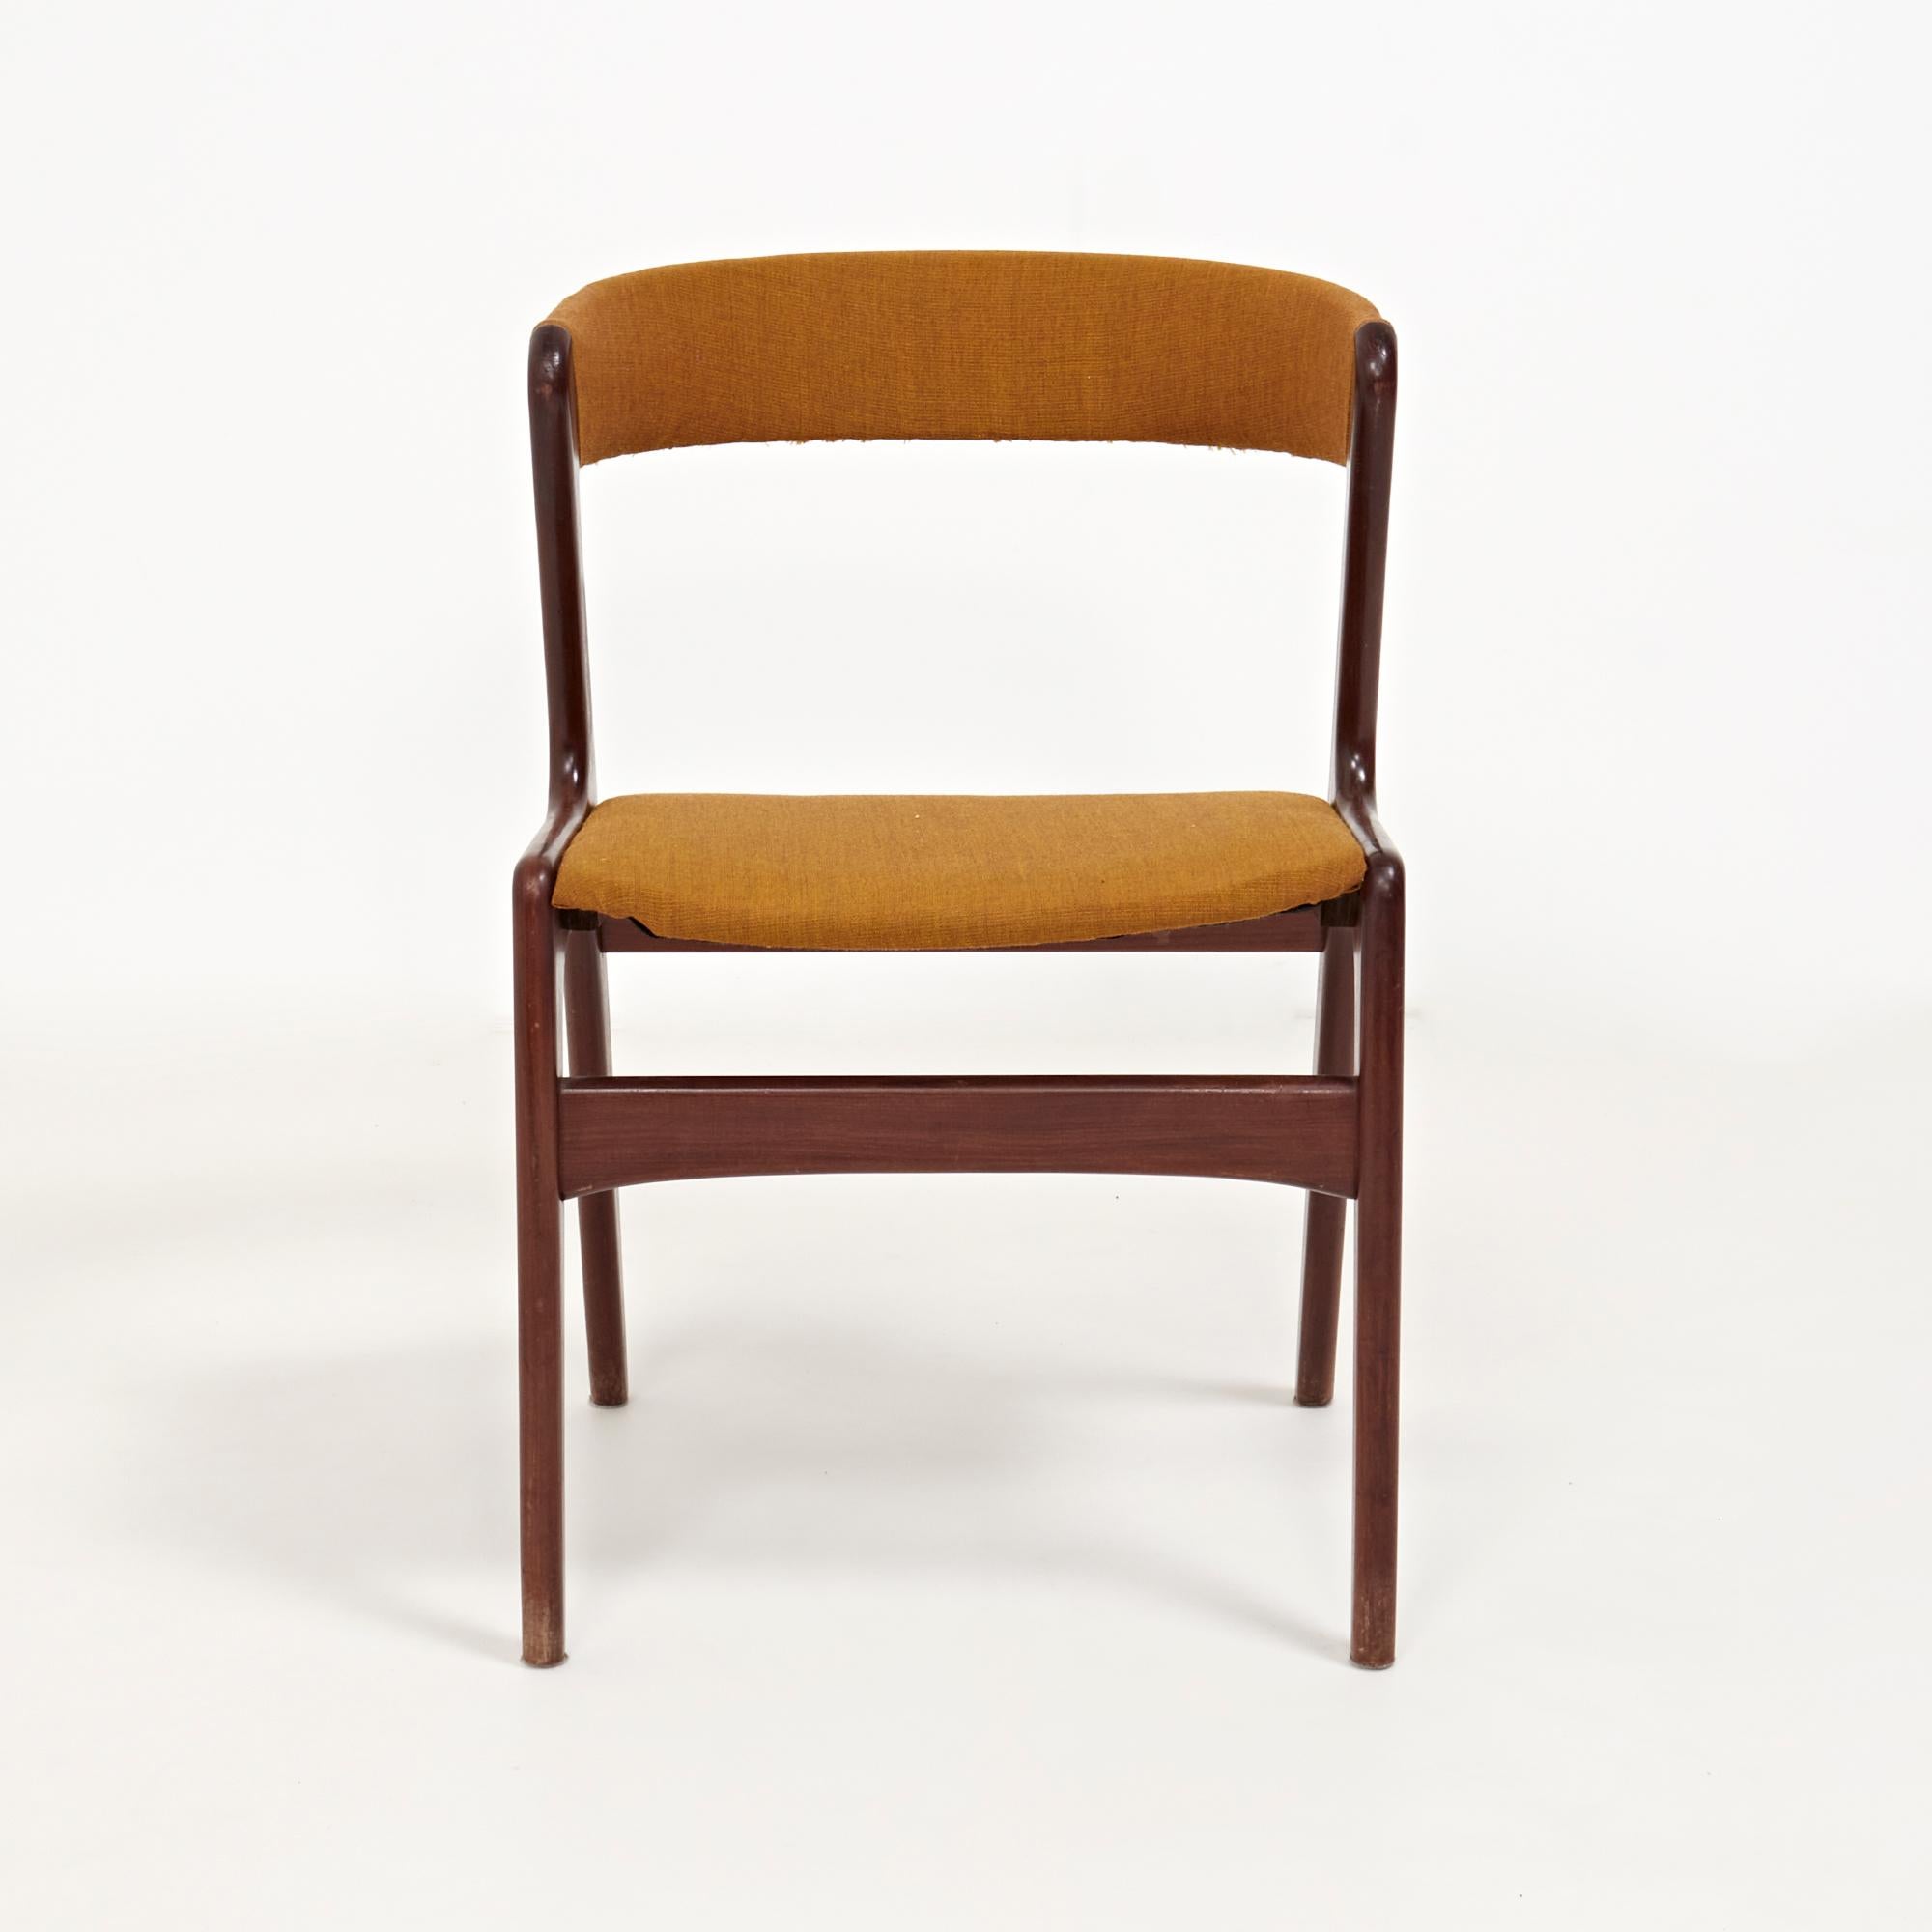 Exemplifying Mid-Century Modern design, this set of 2 fire chairs designed by Kai Kristiansen combine sleek curves with angular lines to create an iconic Silhouette.

Constructed with solid teak wood bases, the chairs have curved backrests in a